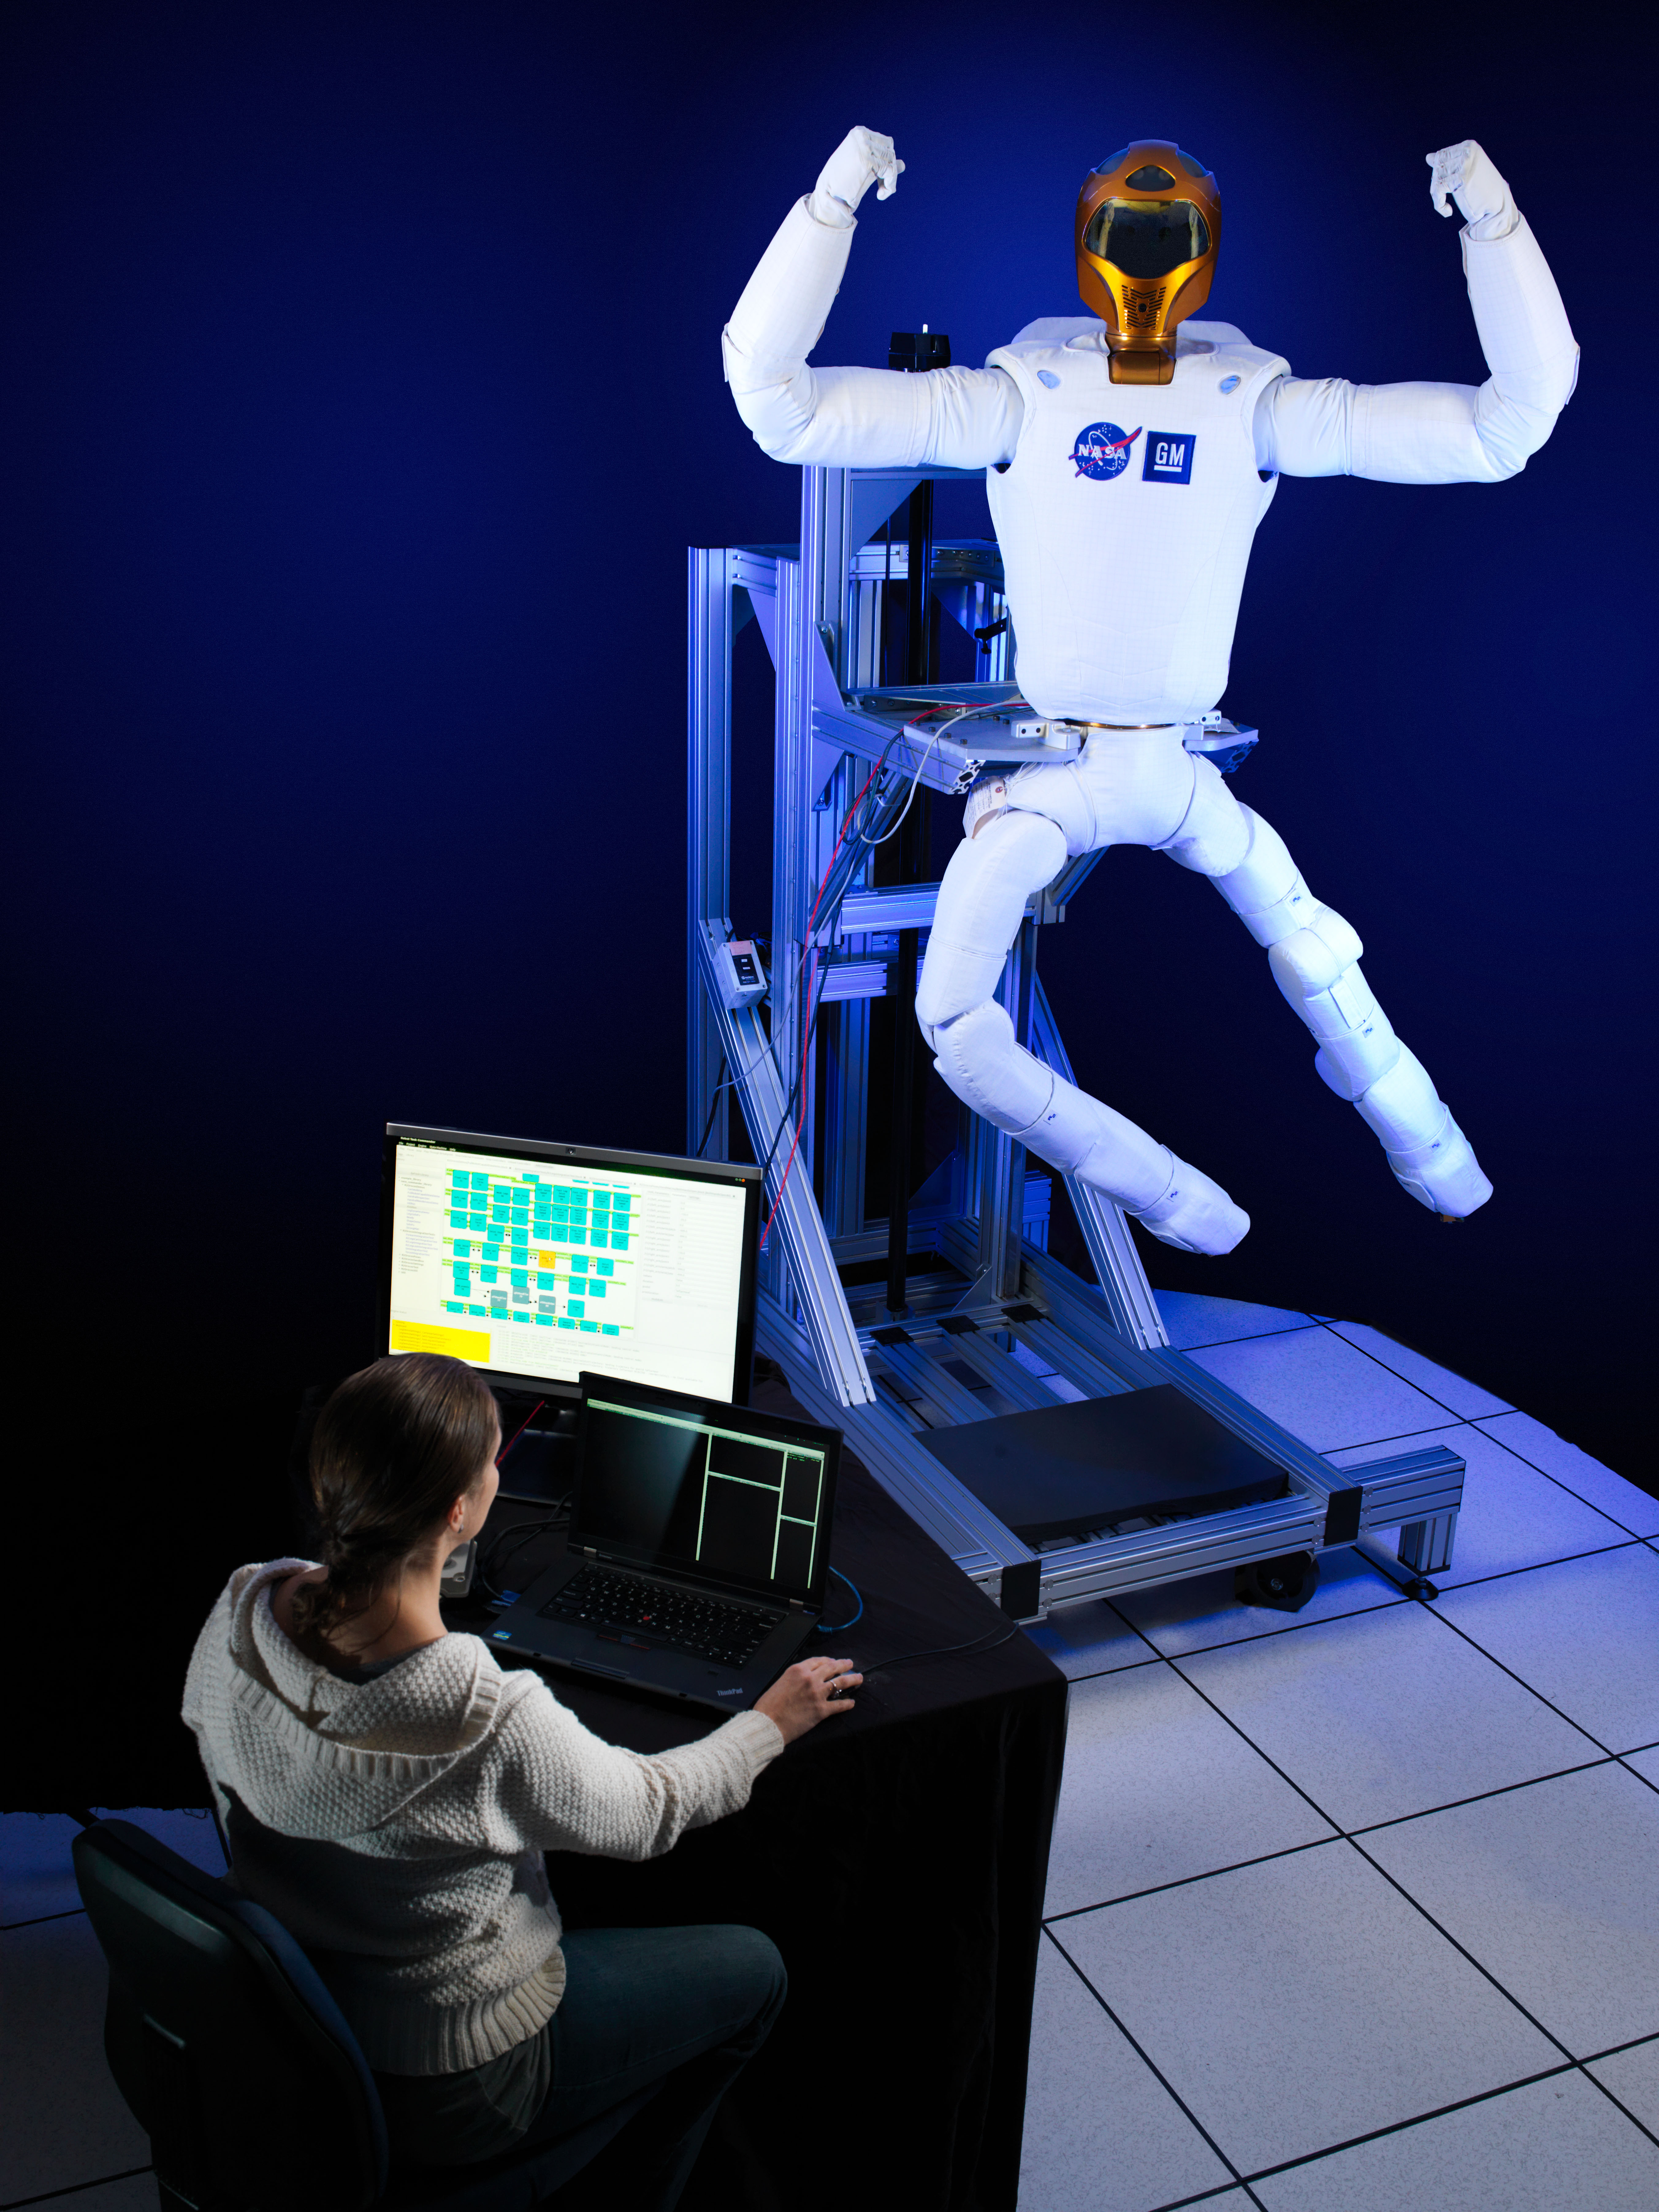 Robonaut 2 (R2) and a woman sitting at a computer nearby